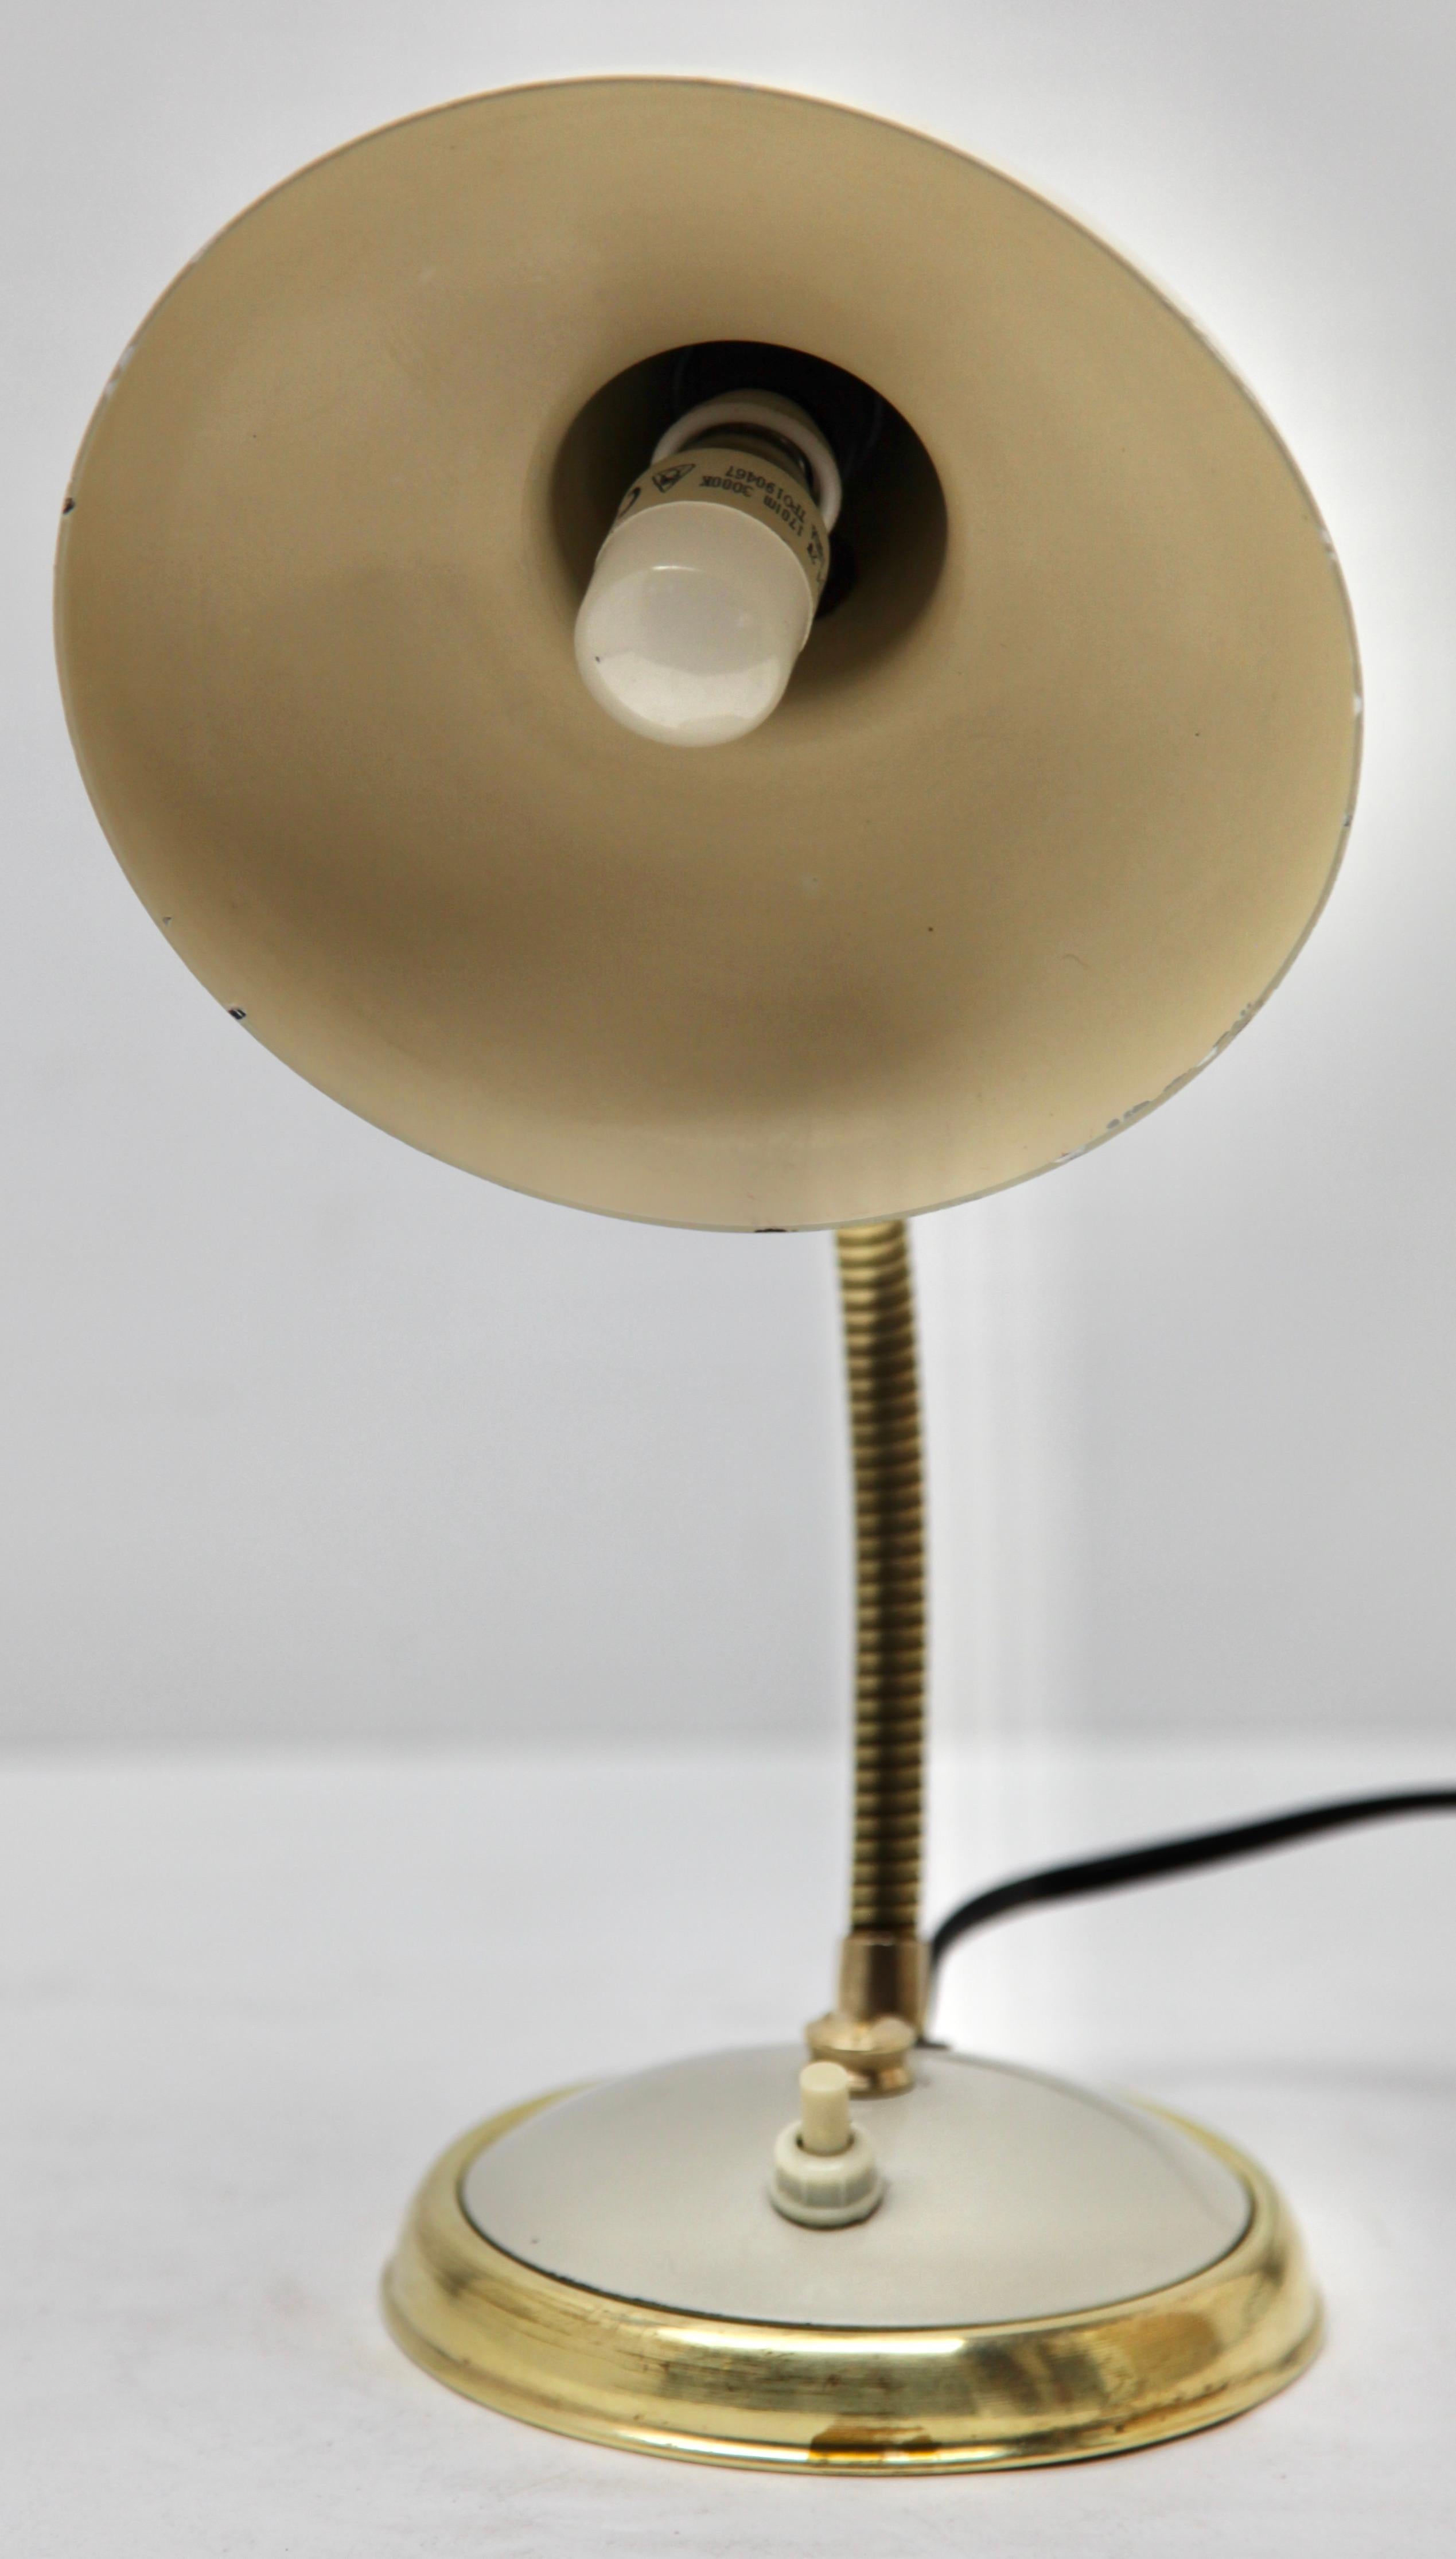 Mid-20th Century Vintage French Desk or Bedside Lamp from Aluminor France, 1950s For Sale